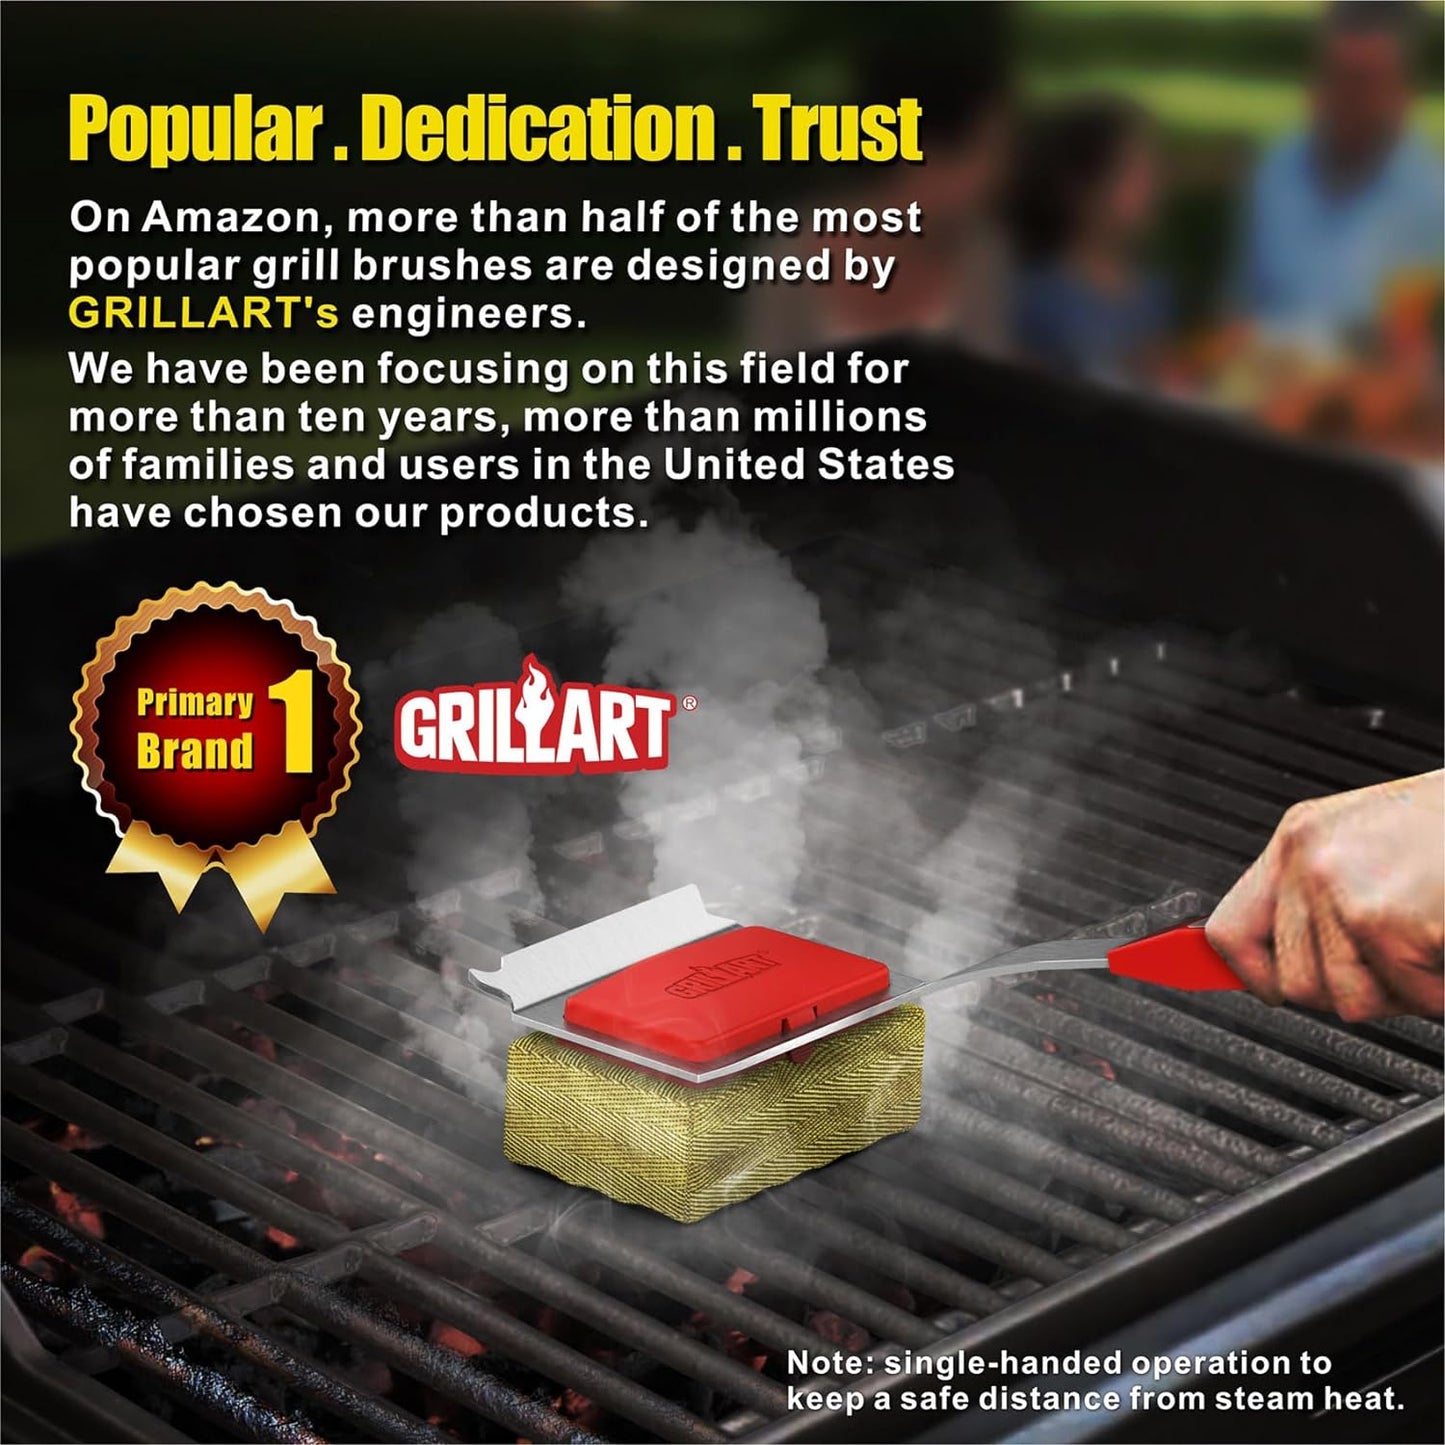 Grill Brush Bristle Free. Steamwizards BBQ Replaceable Cleaning Head, Unique Seamless-Fit Scraper Tool for Cast Iron/Stainless-Steel Grates, Safe Barbecue Grill Cleaner-Red